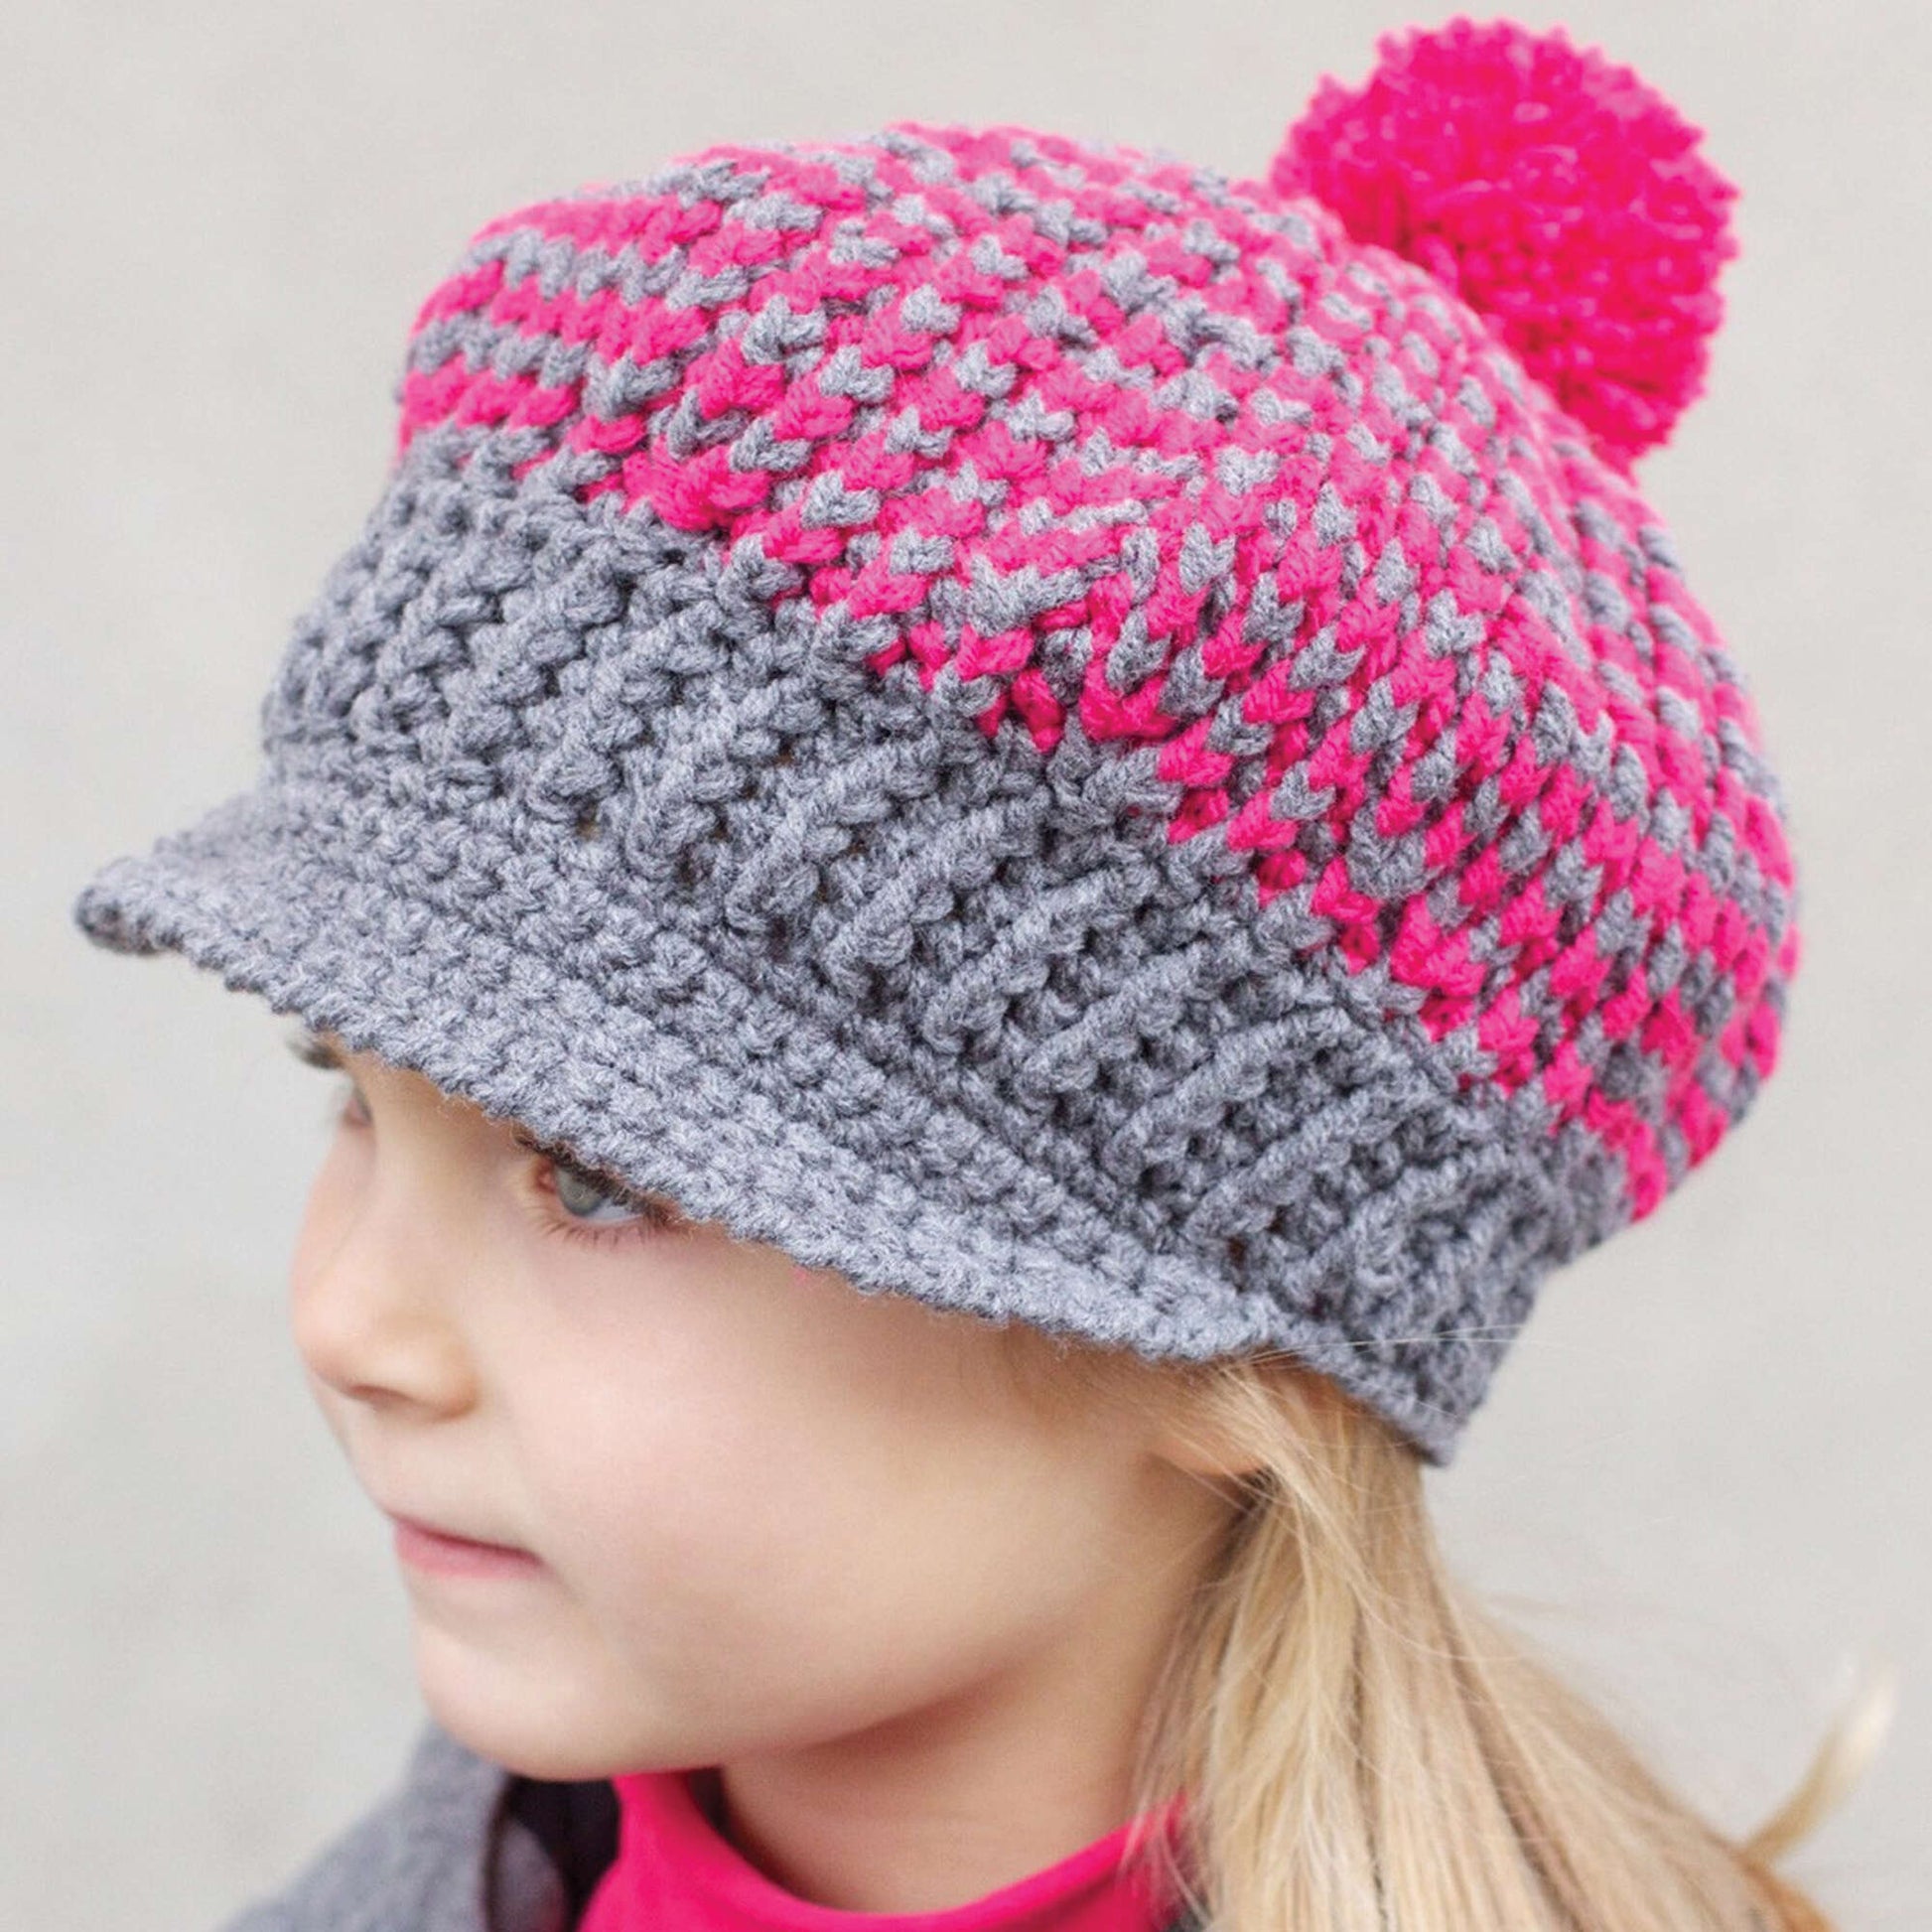 Free Patons Newsboy's and Girl's Caps Crochet Pattern